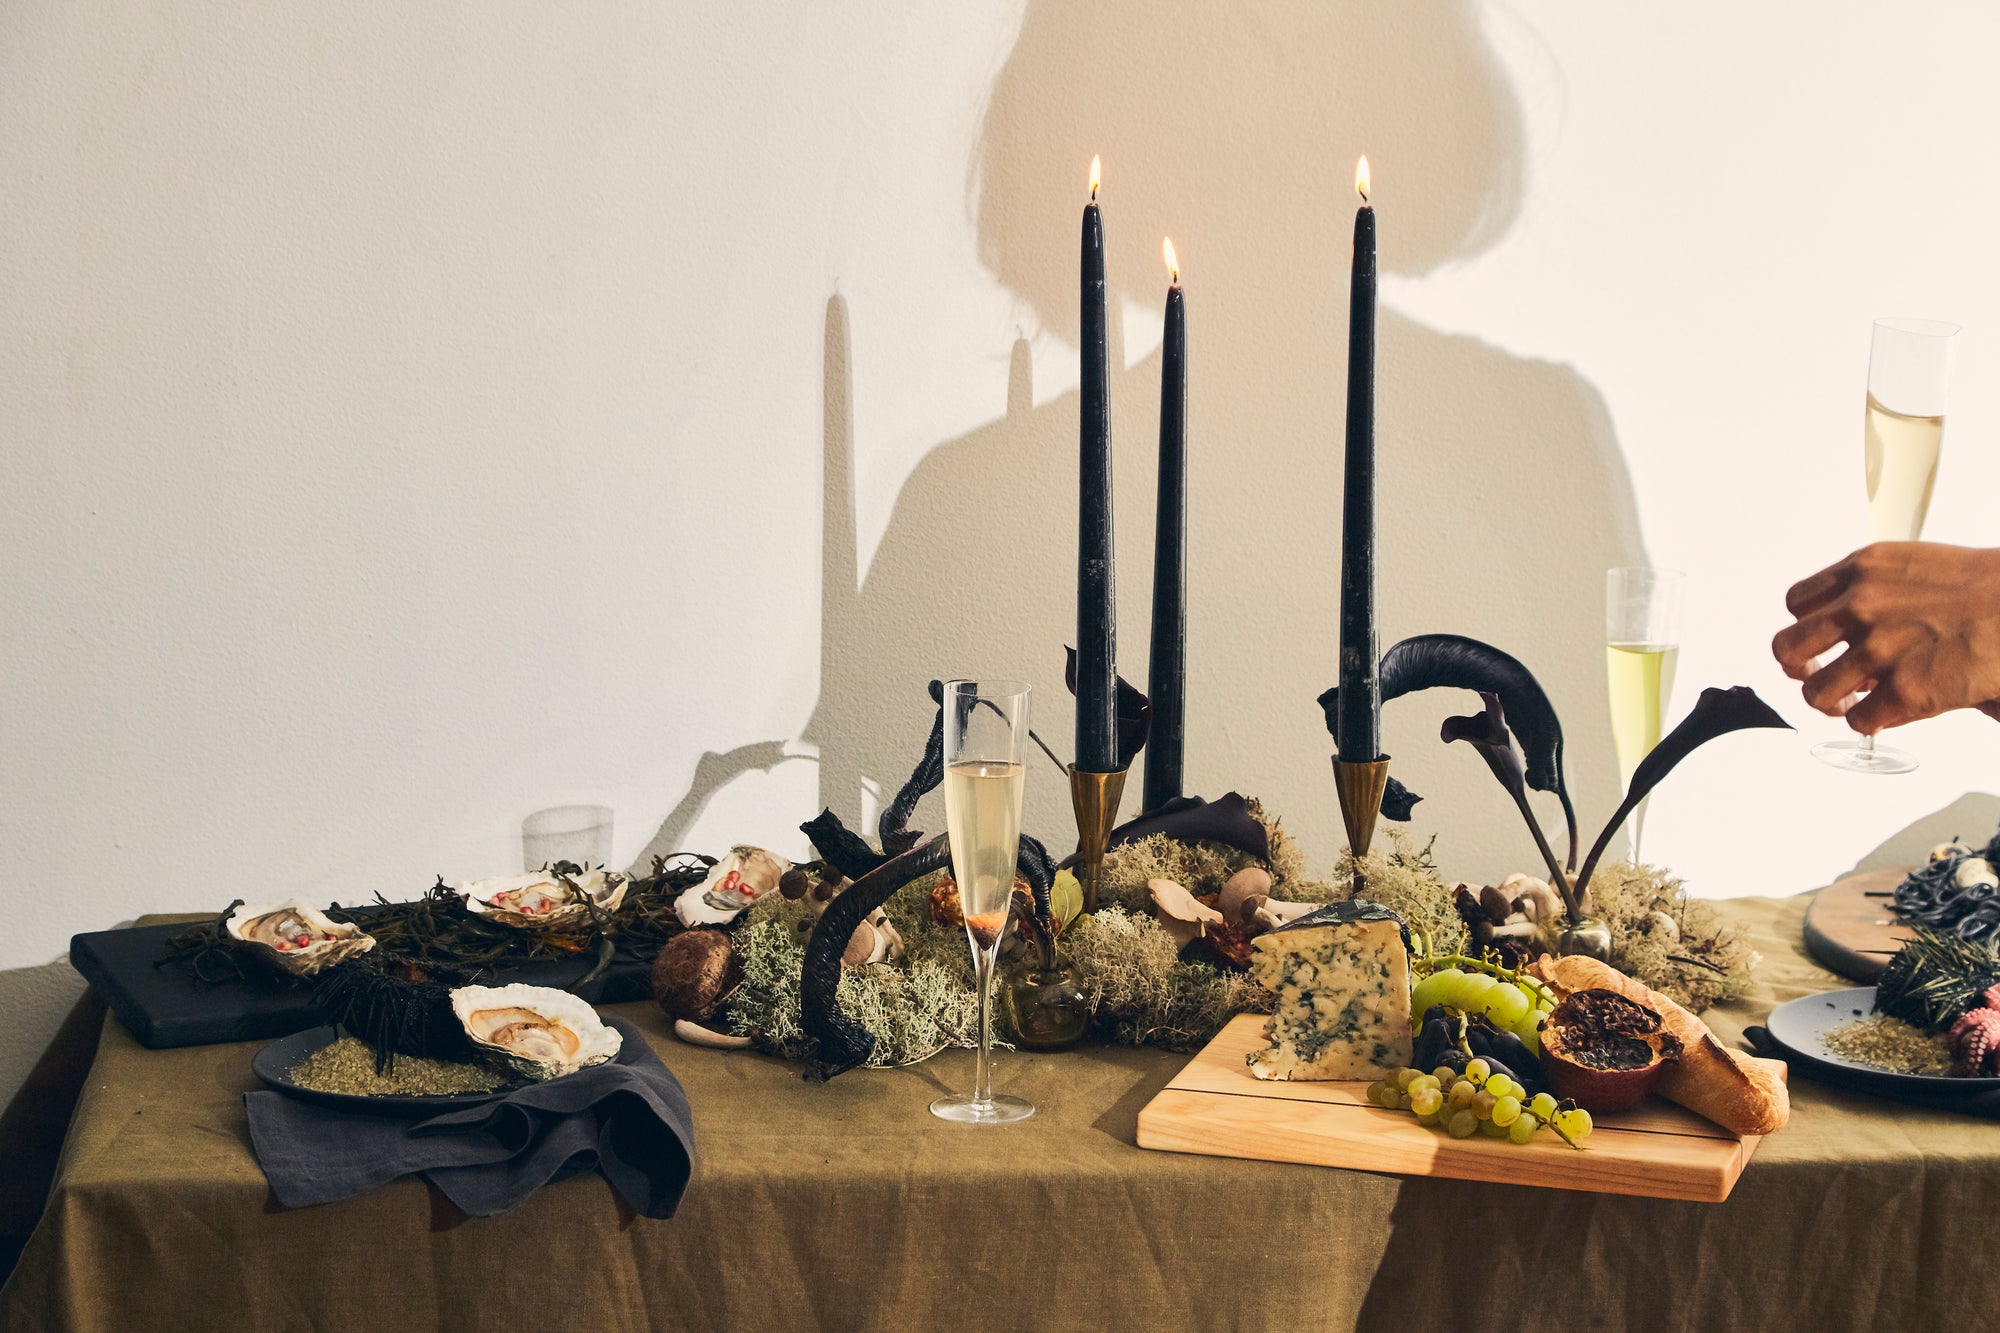 A Sophisticated and Spooky Halloween Dinner Party: Enter the Garden of Earthly Delights